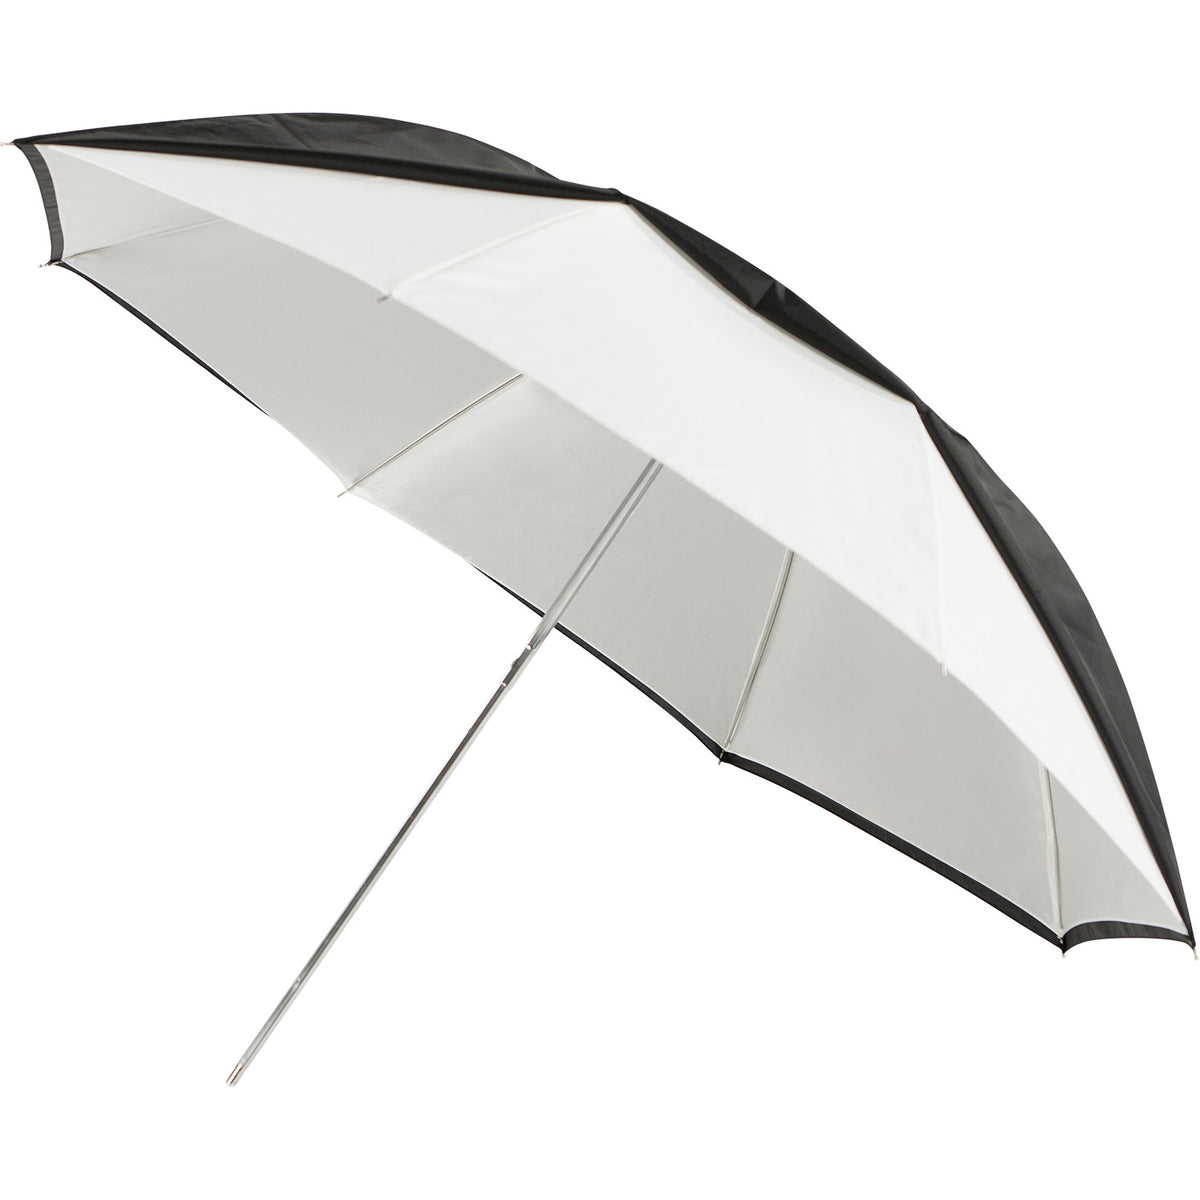 #2011 - 43" White Satin Collapsible Umbrella with Removable Black Cover